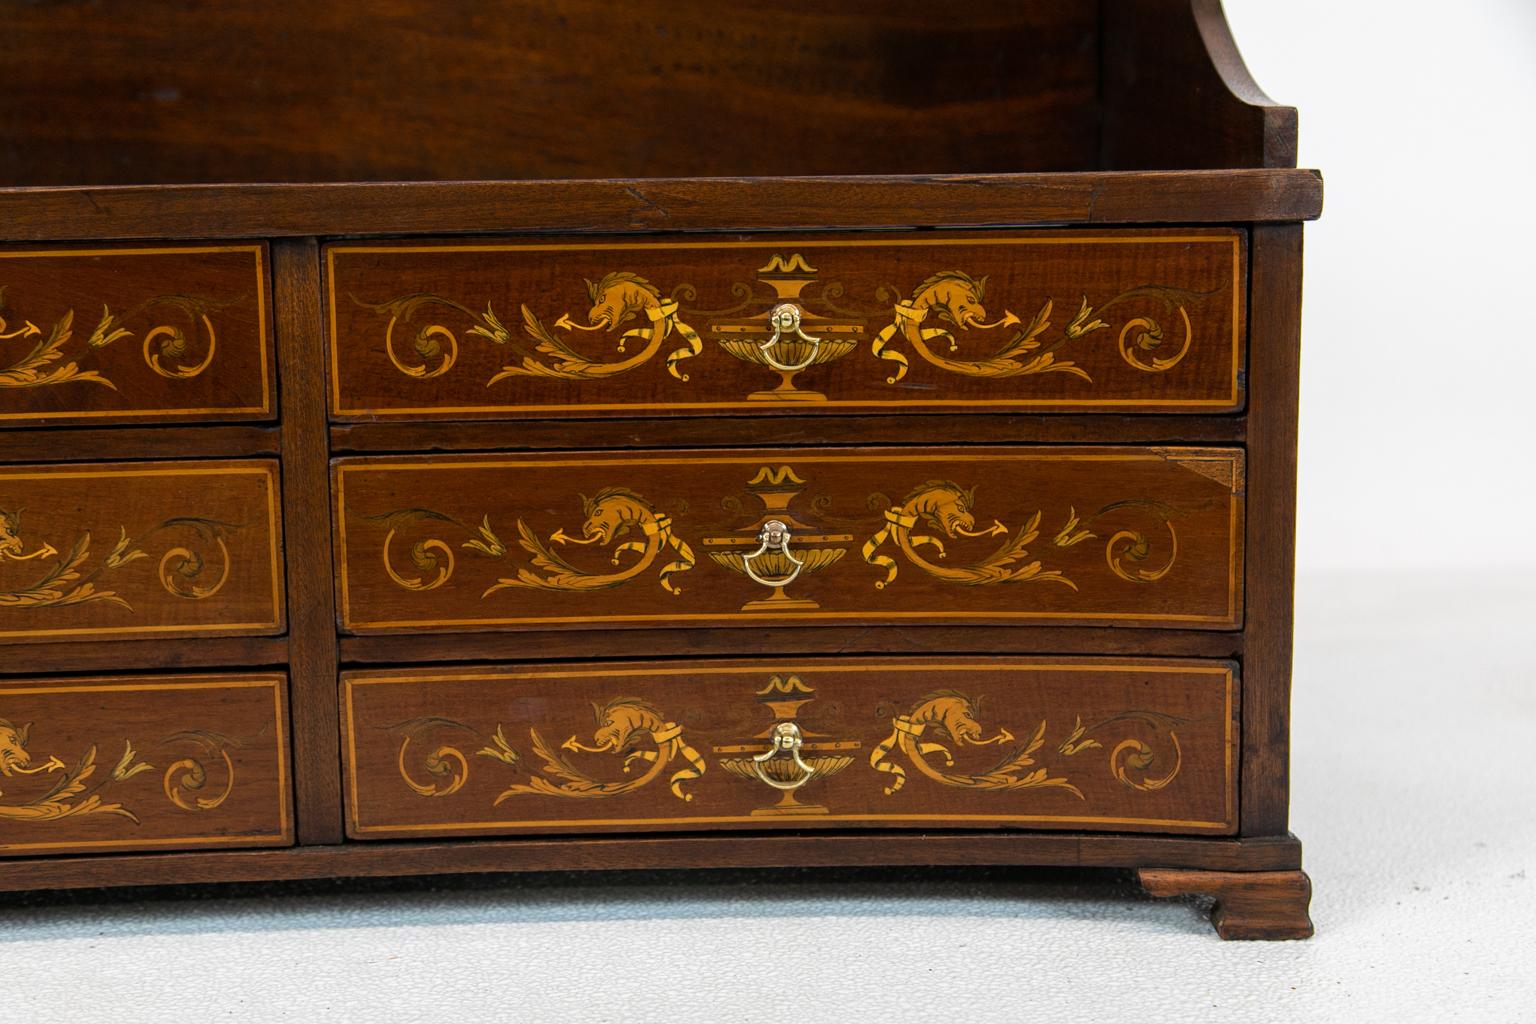 English mahogany concave inlaid countertop chest with the drawers inlaid with boxwood, satinwood, and engraved classical urns and dragons on ogee feet.